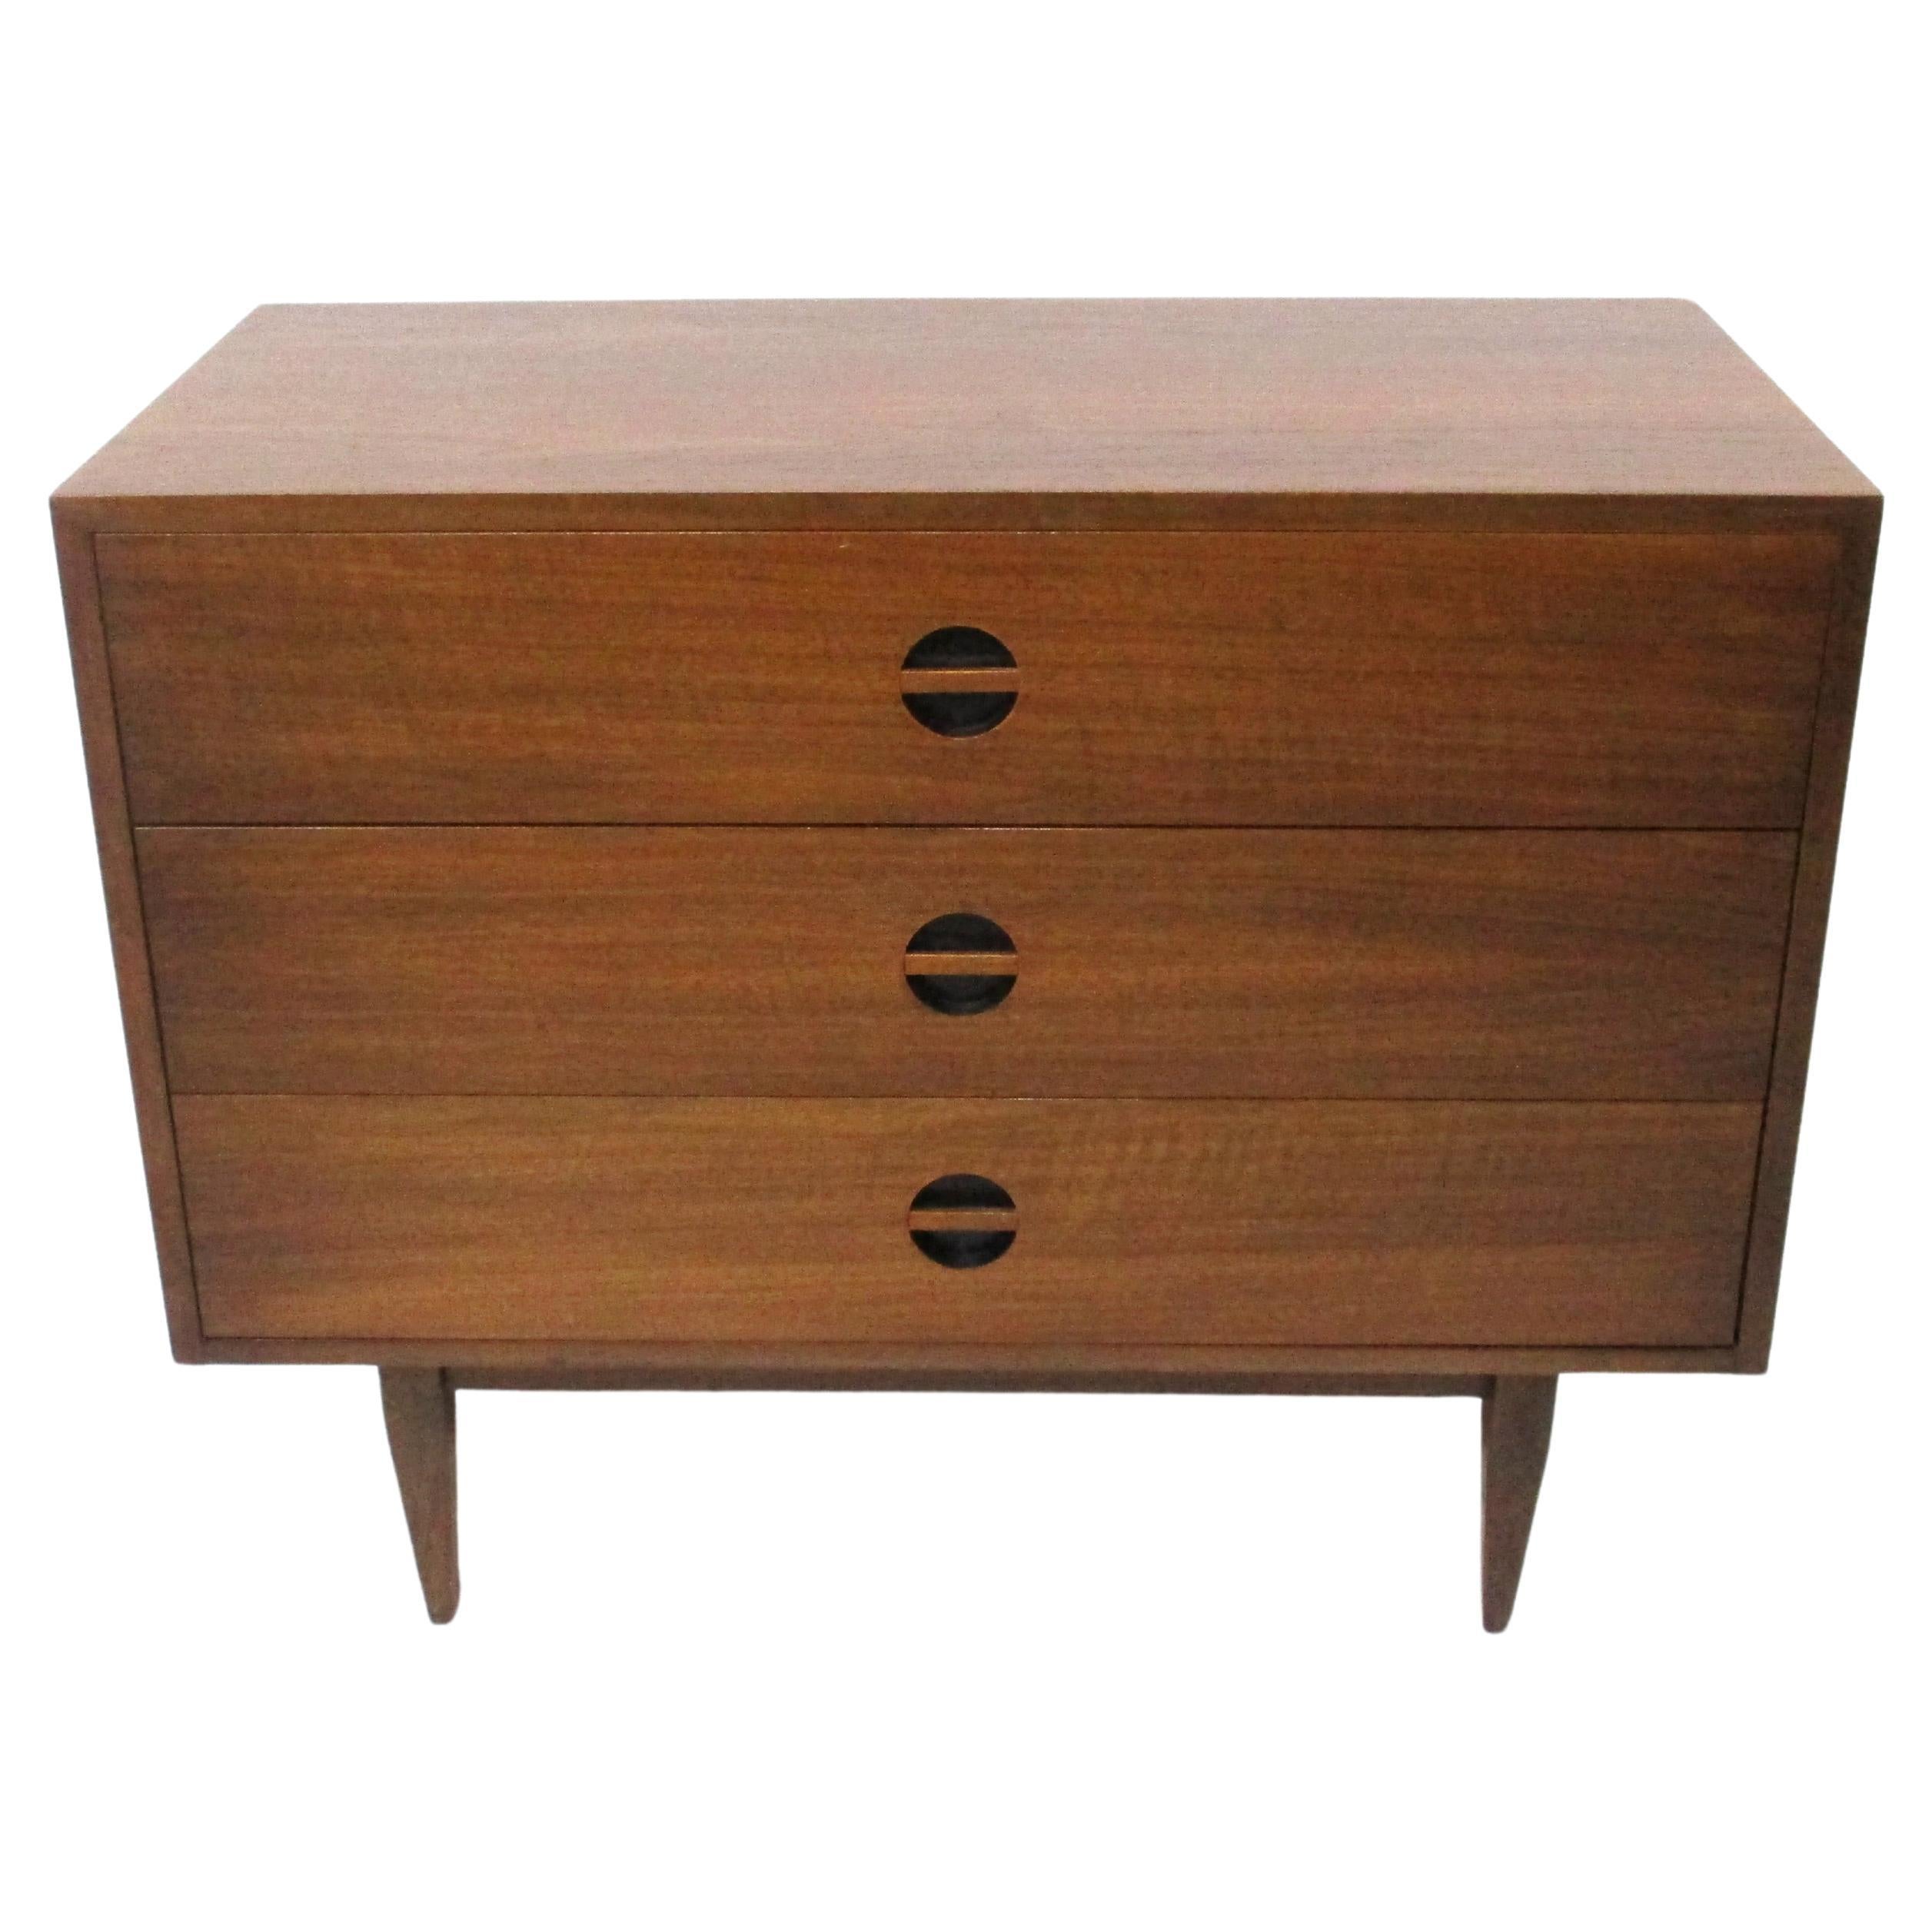 A nicely grained medium dark walnut three drawer dresser with cut in pulls having satin black back rounds sitting on tapered legs . Designed in the manner of Arne Vodder and manufactured by the West Michigan Furniture company from an area that was